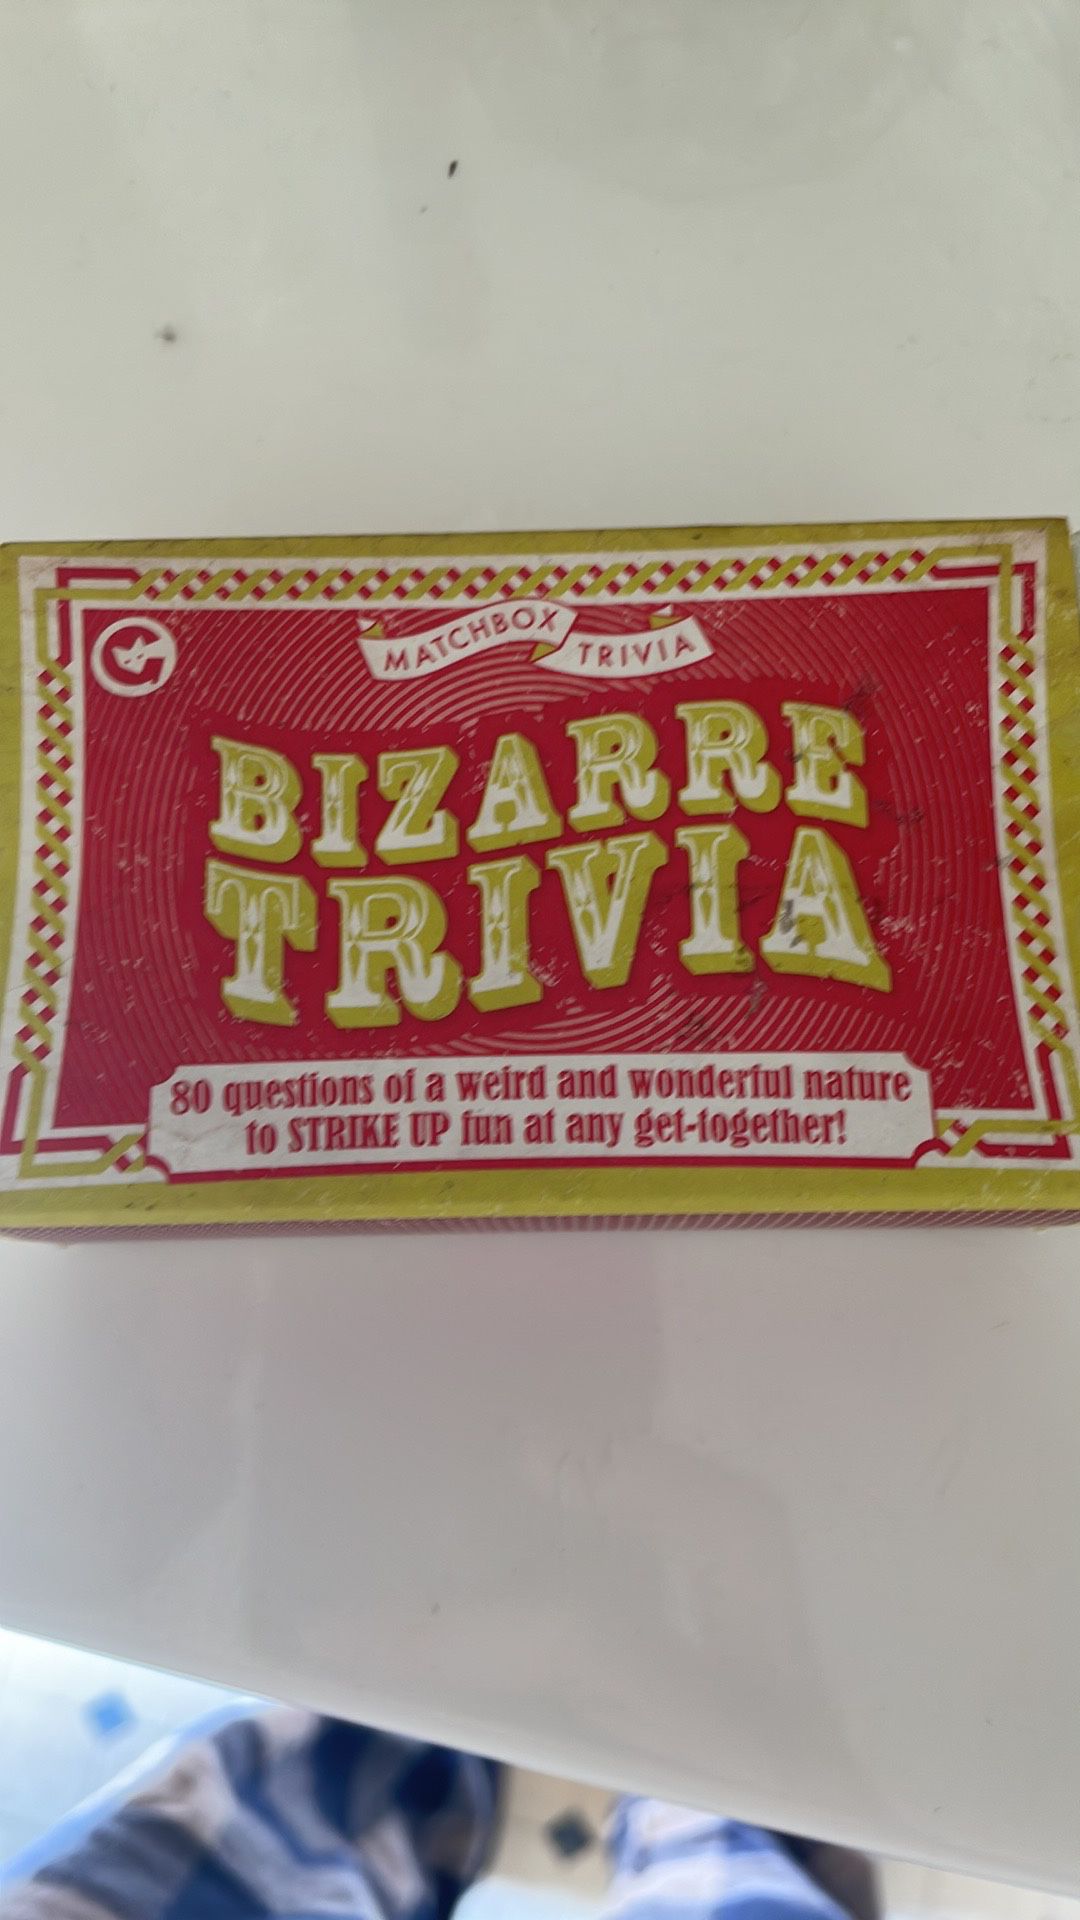 NWT Bizarre Trivia Card Game for Game Night